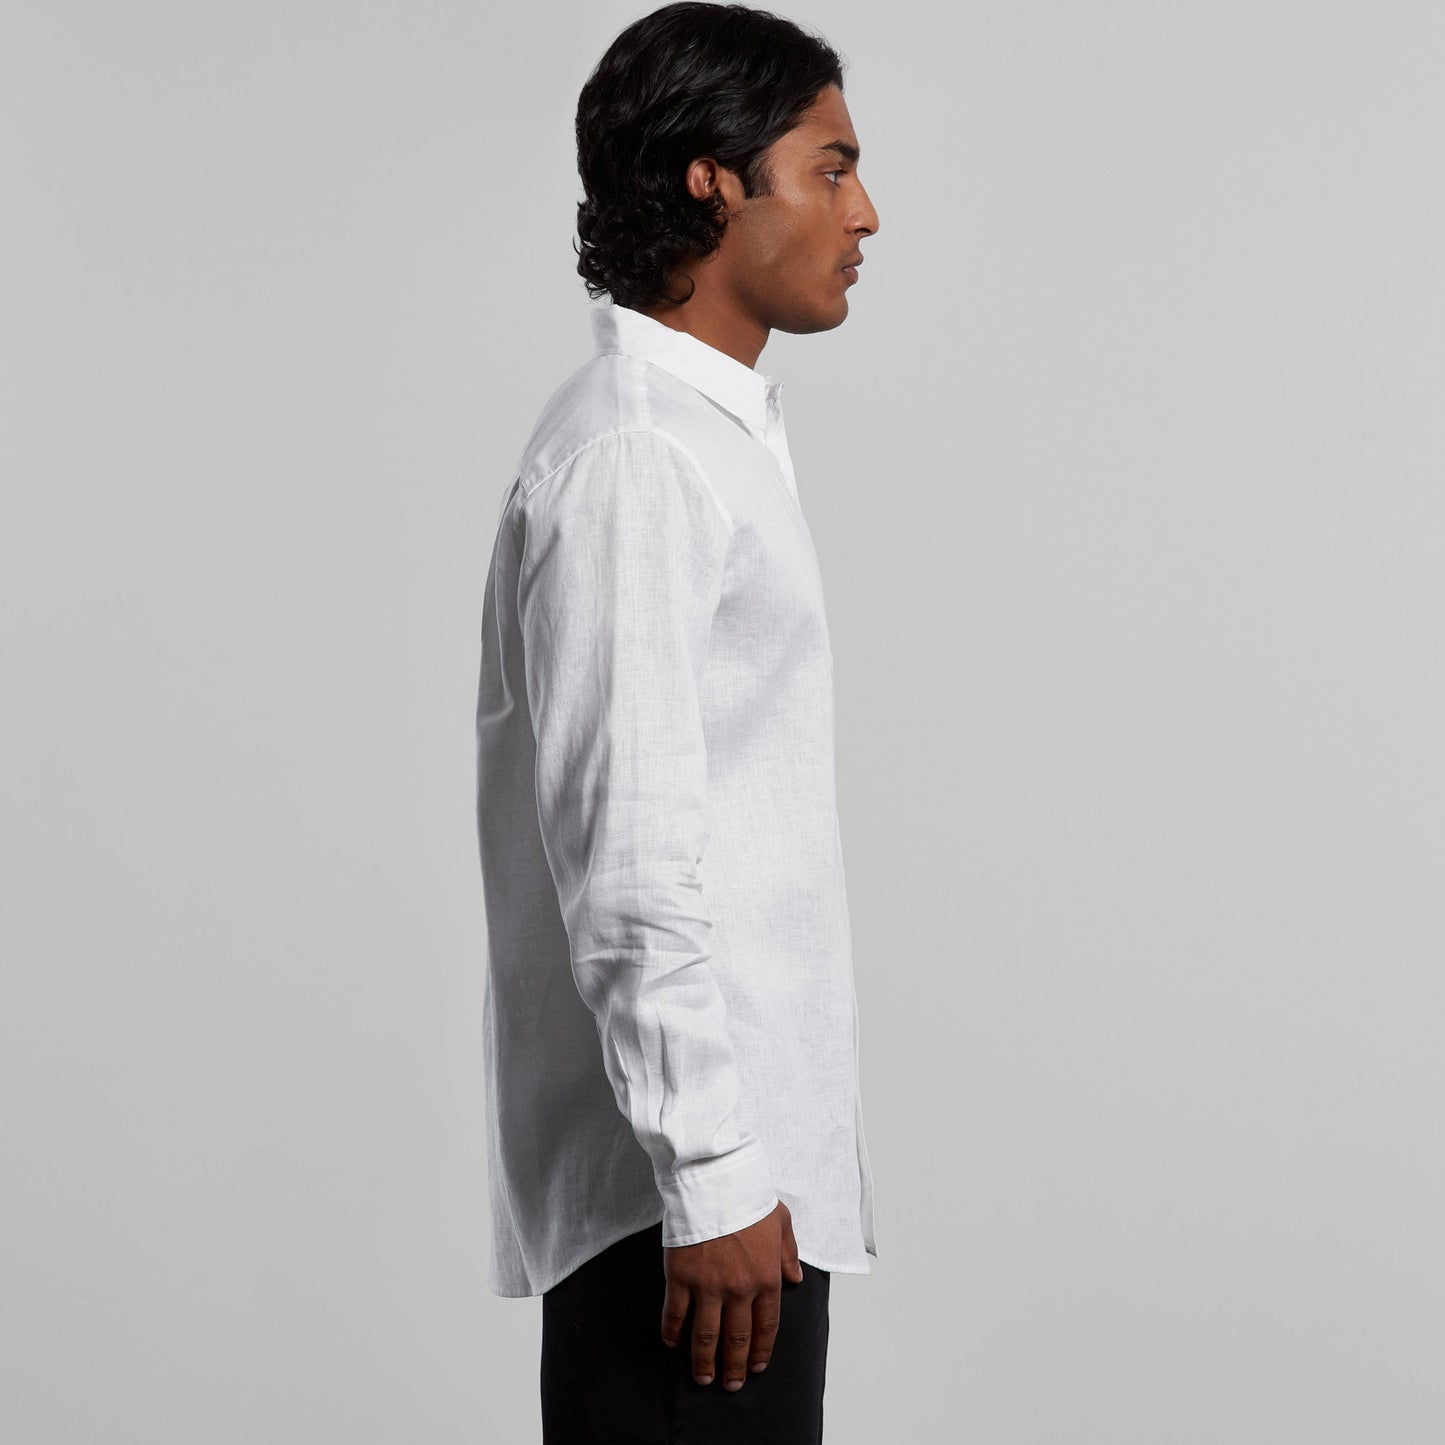 Mens Linen Long Sleeve Shirt | COLD COFFEE LABEL